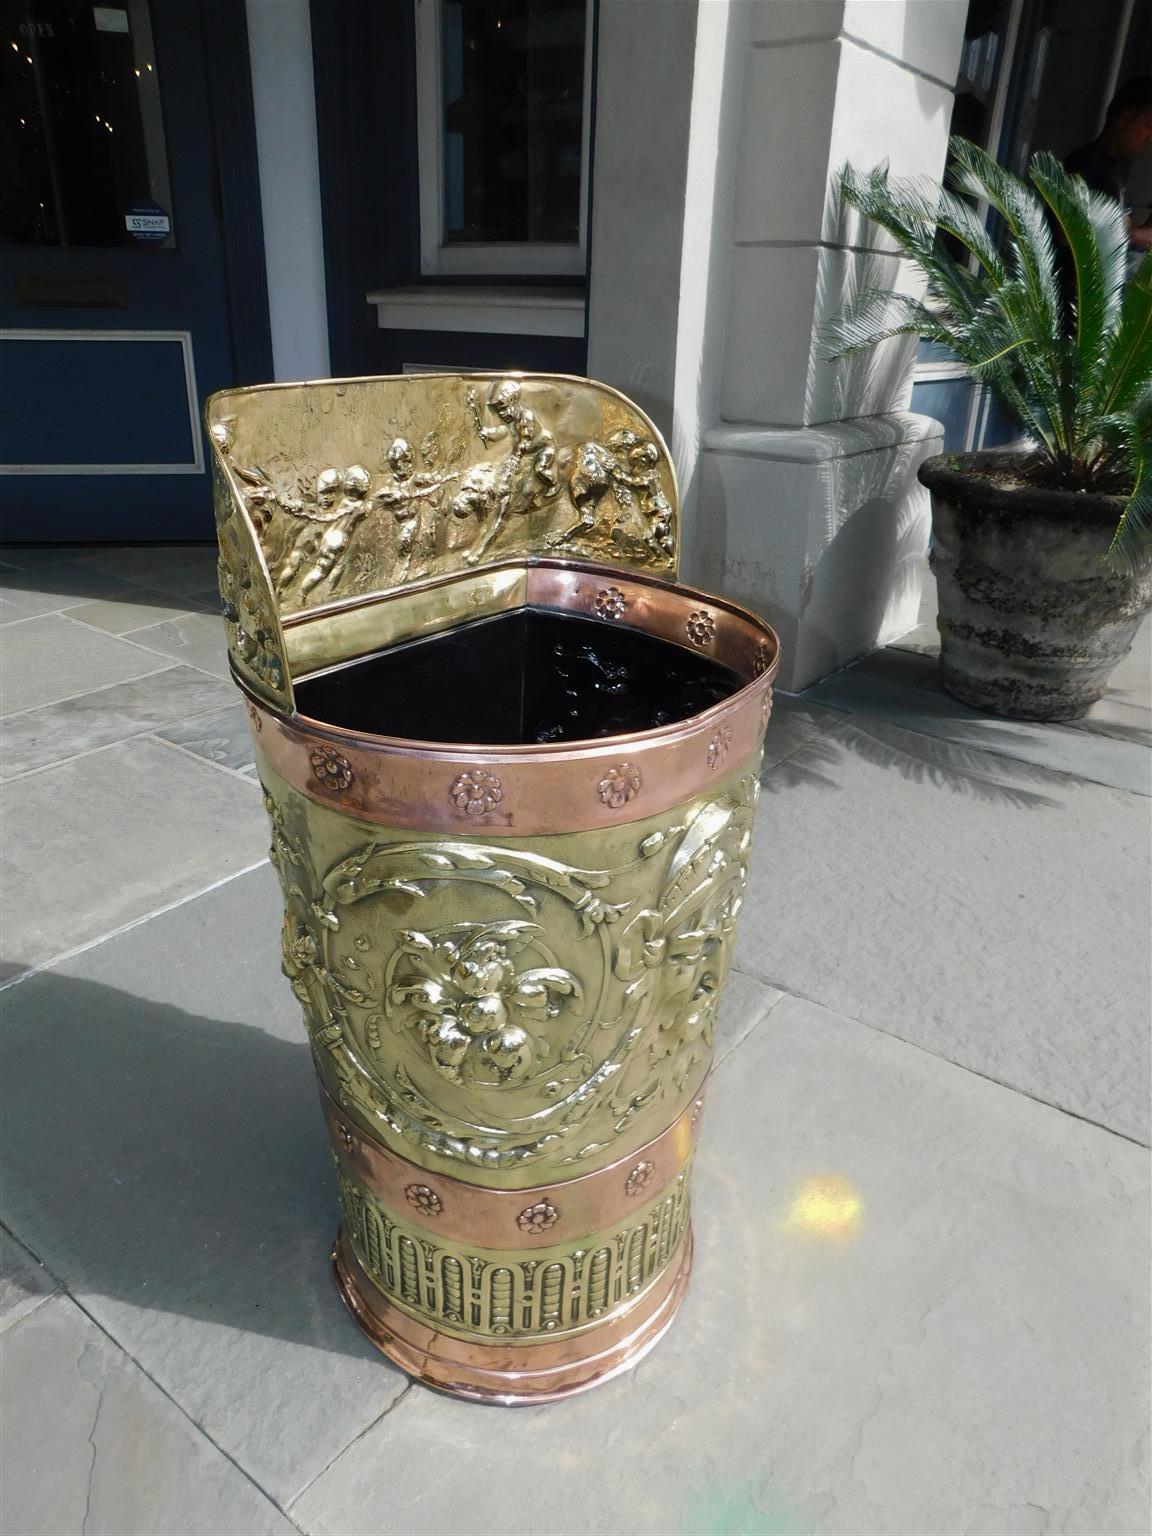 Cast English Brass & Copper Figural Foliage Medallion Embossed Umbrella Stand, C 1870 For Sale